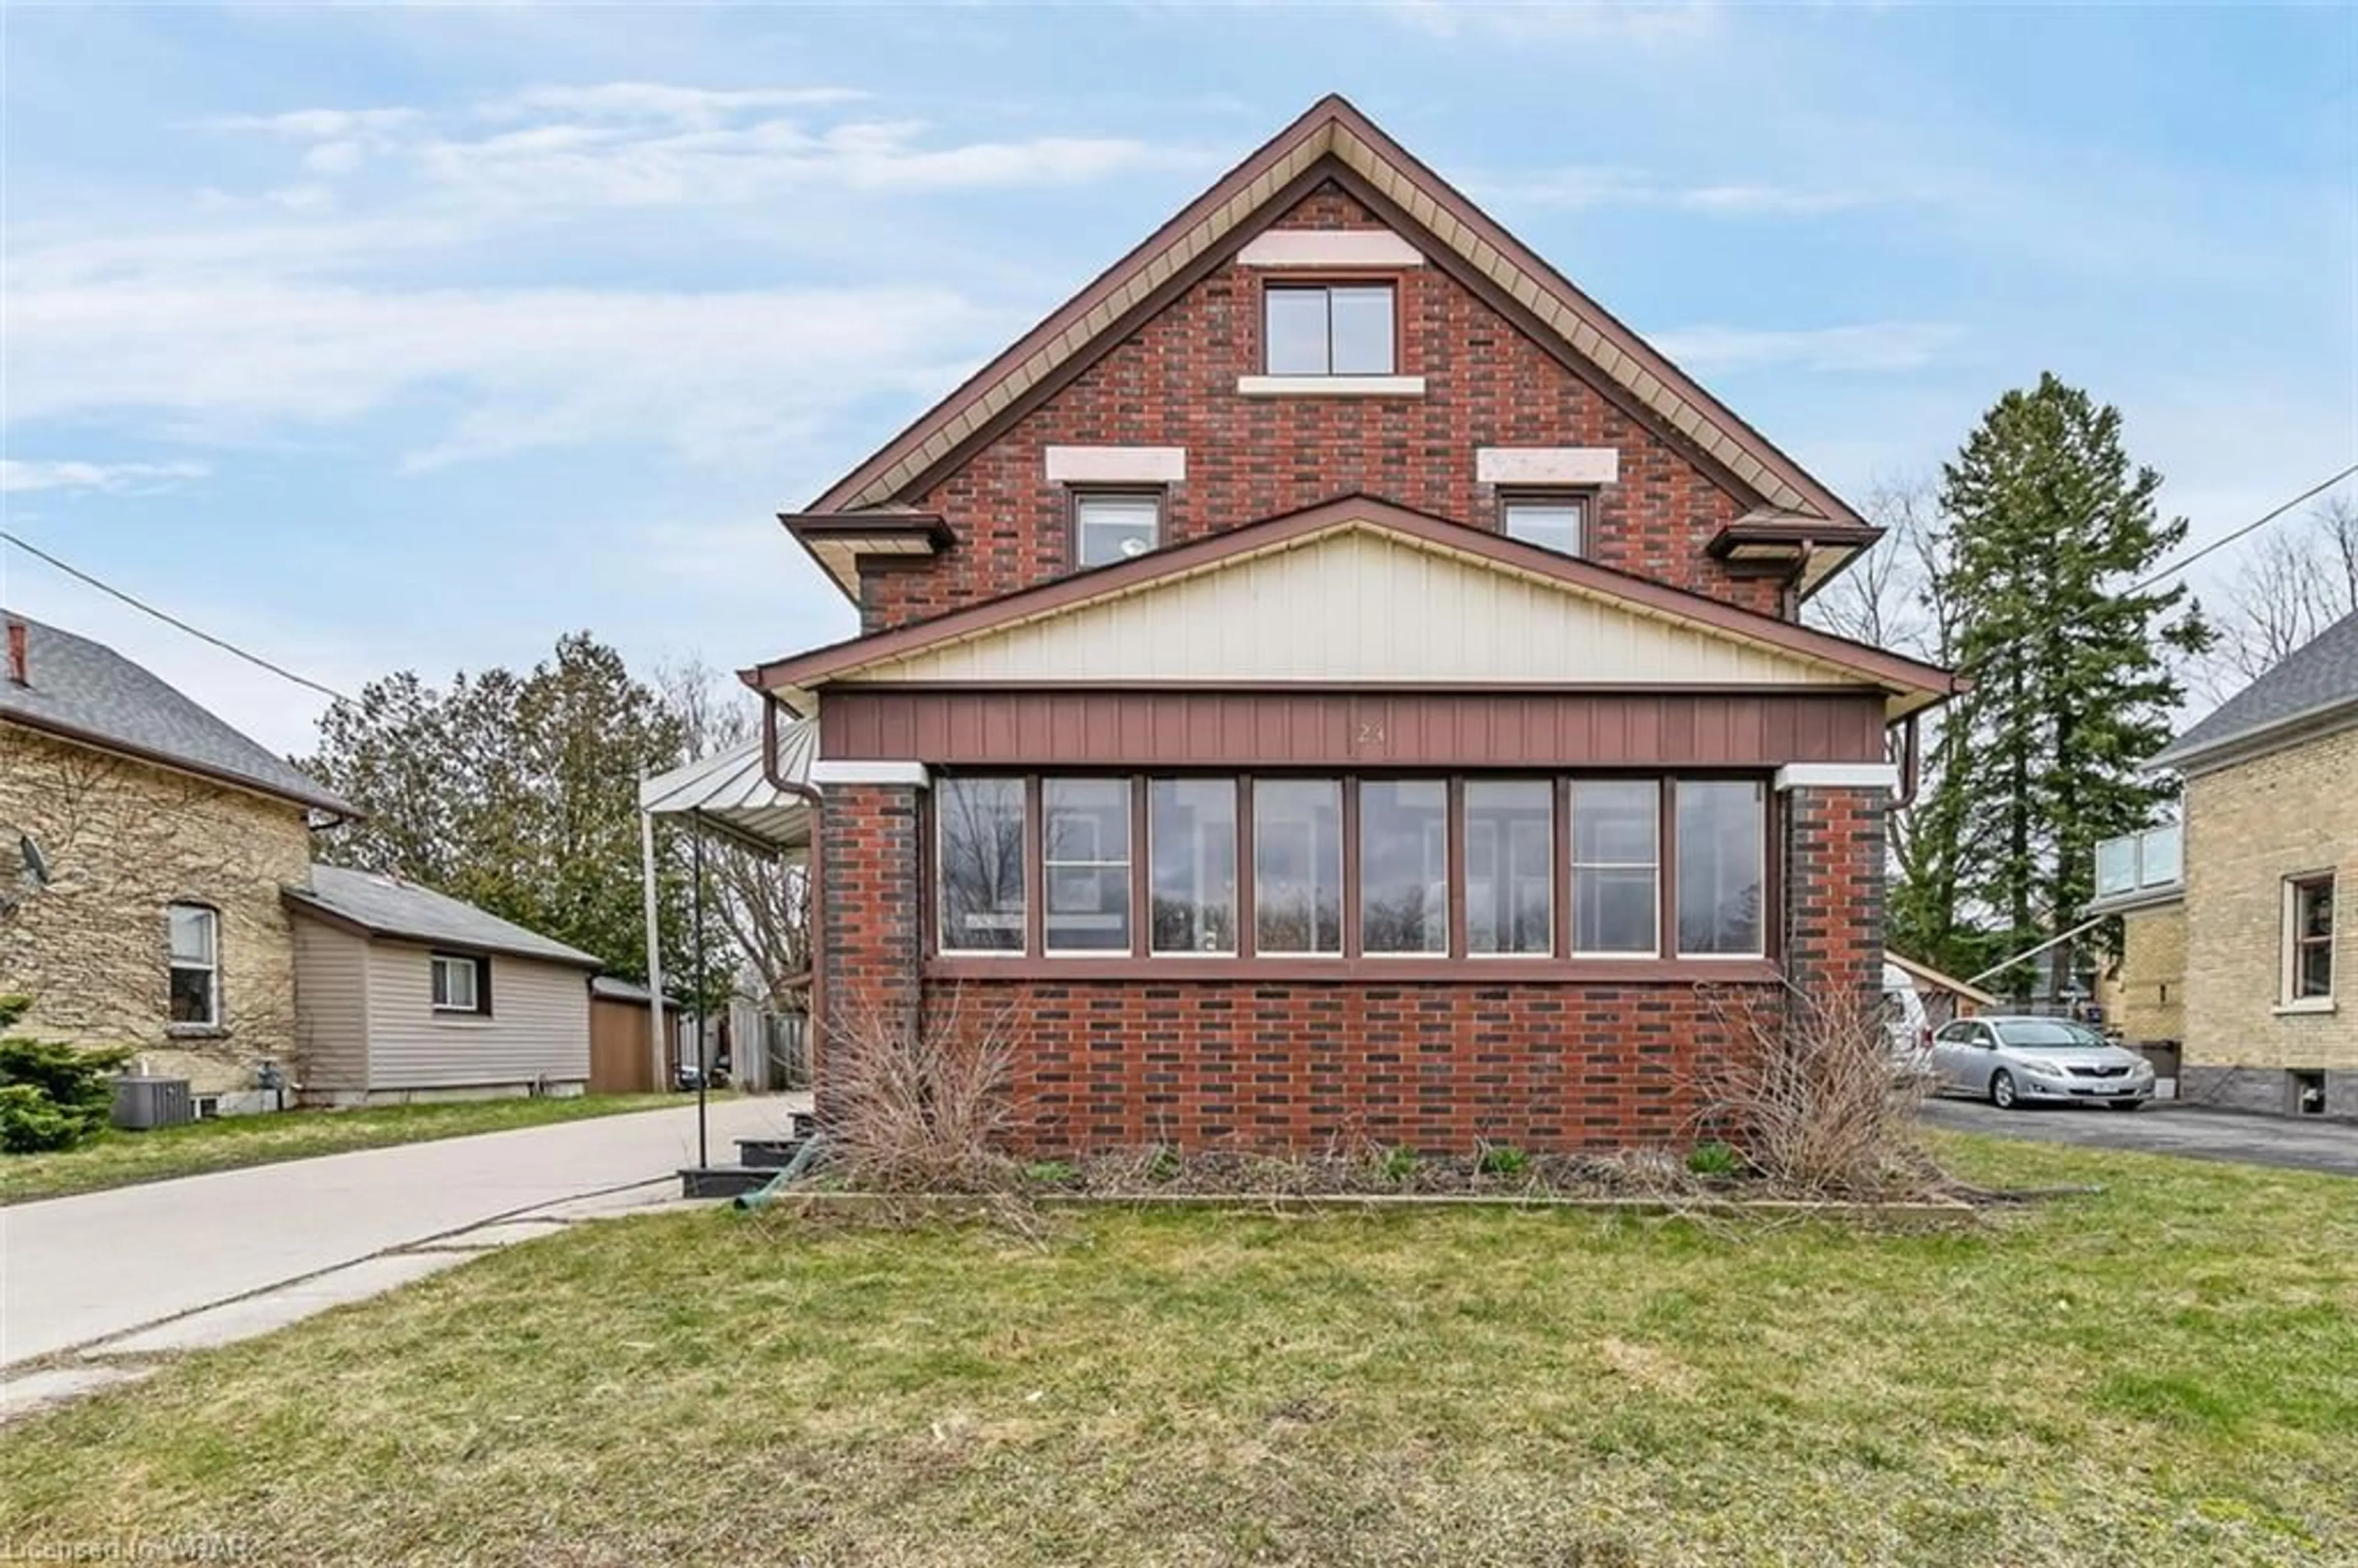 Home with brick exterior material for 23 Wilhelm St, Kitchener Ontario N2H 5R7